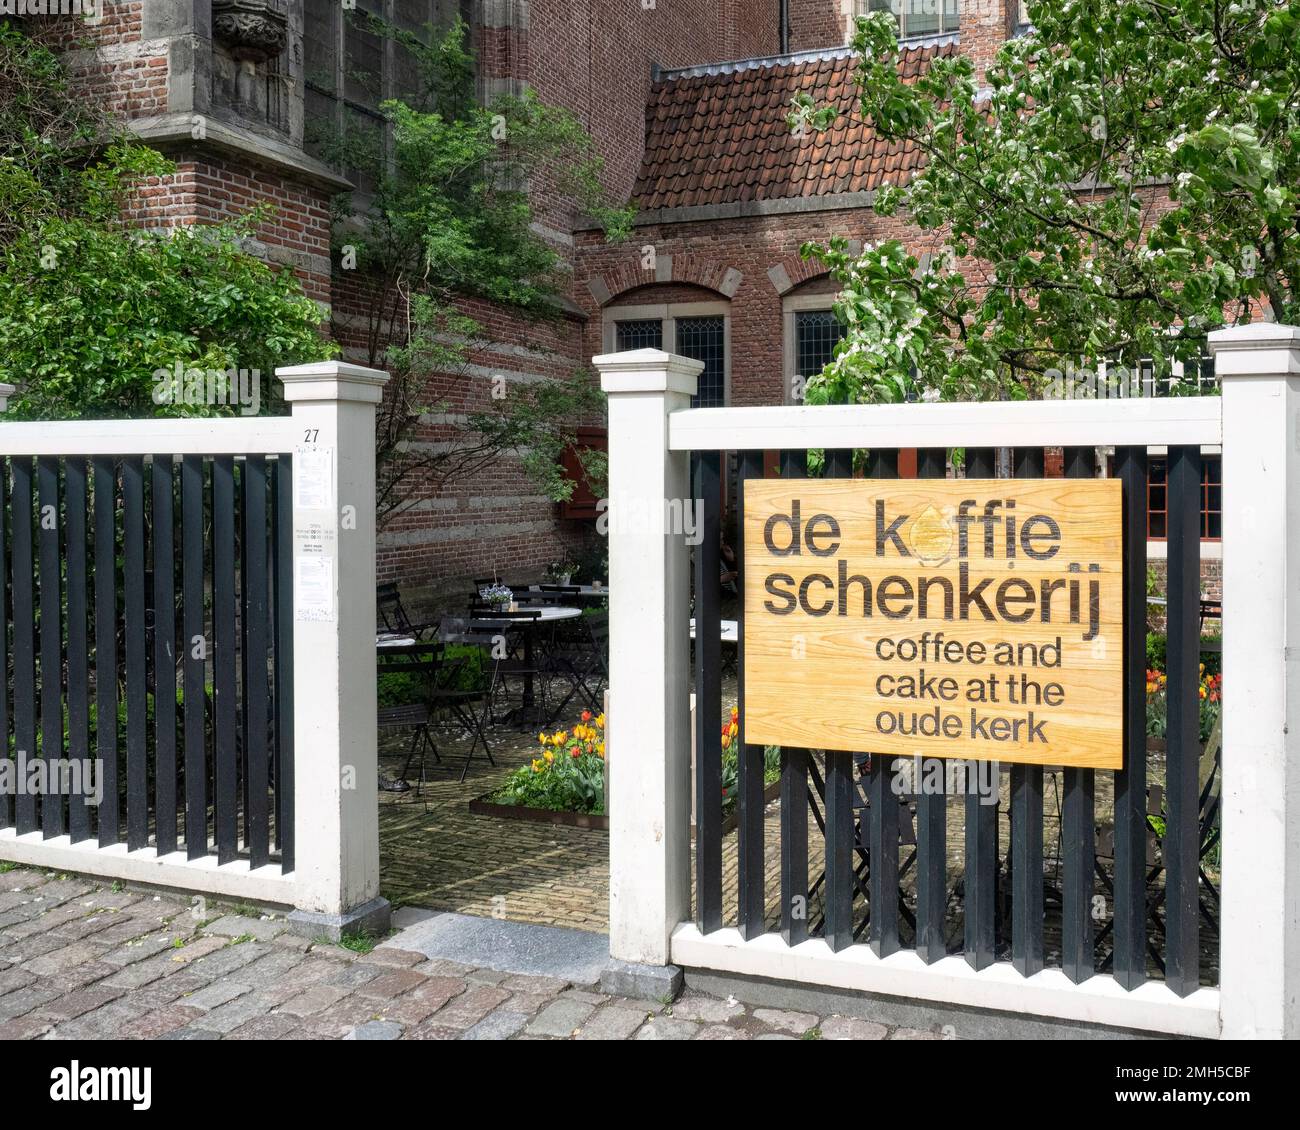 AMSTERDAM, NETHERLANDS - MAY 01, 2018:  Sign outside De Koffie schenkerij (Coffee and Cake) Cafe in the old sacristy of the Oude Kerk church Stock Photo